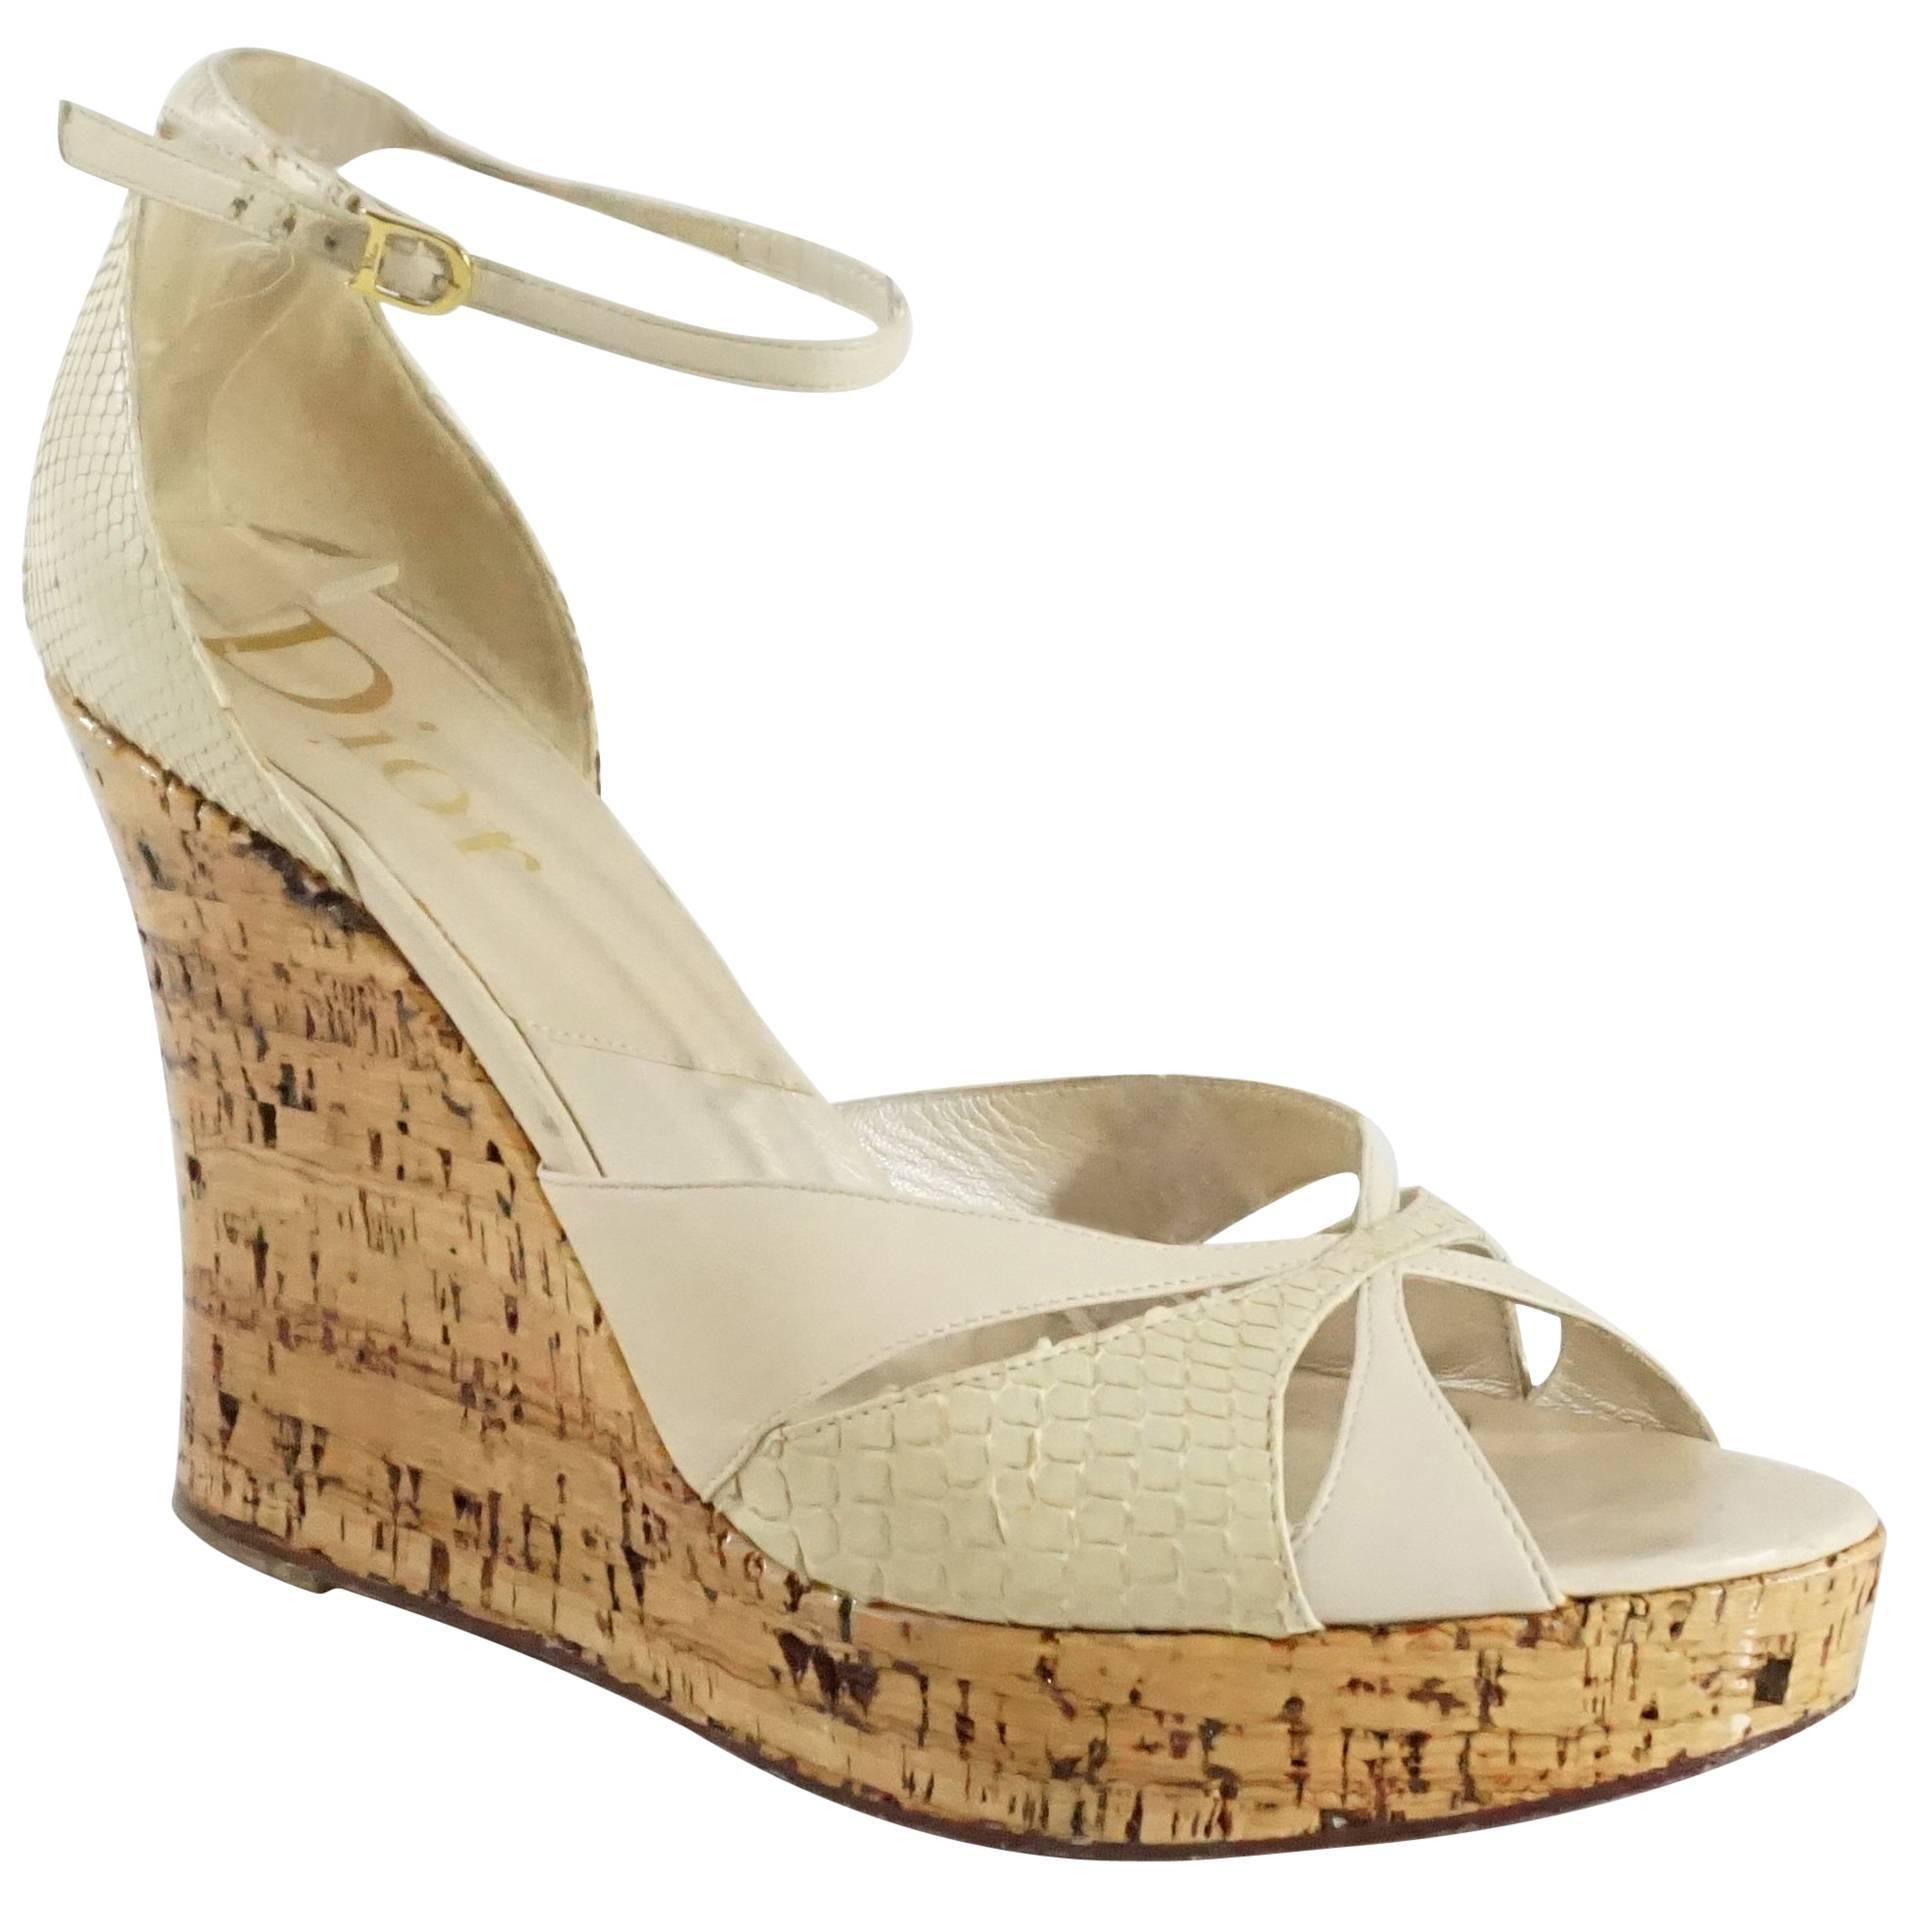 Christian Dior Beige Cork Wedges with Ankle Straps - 42 For Sale